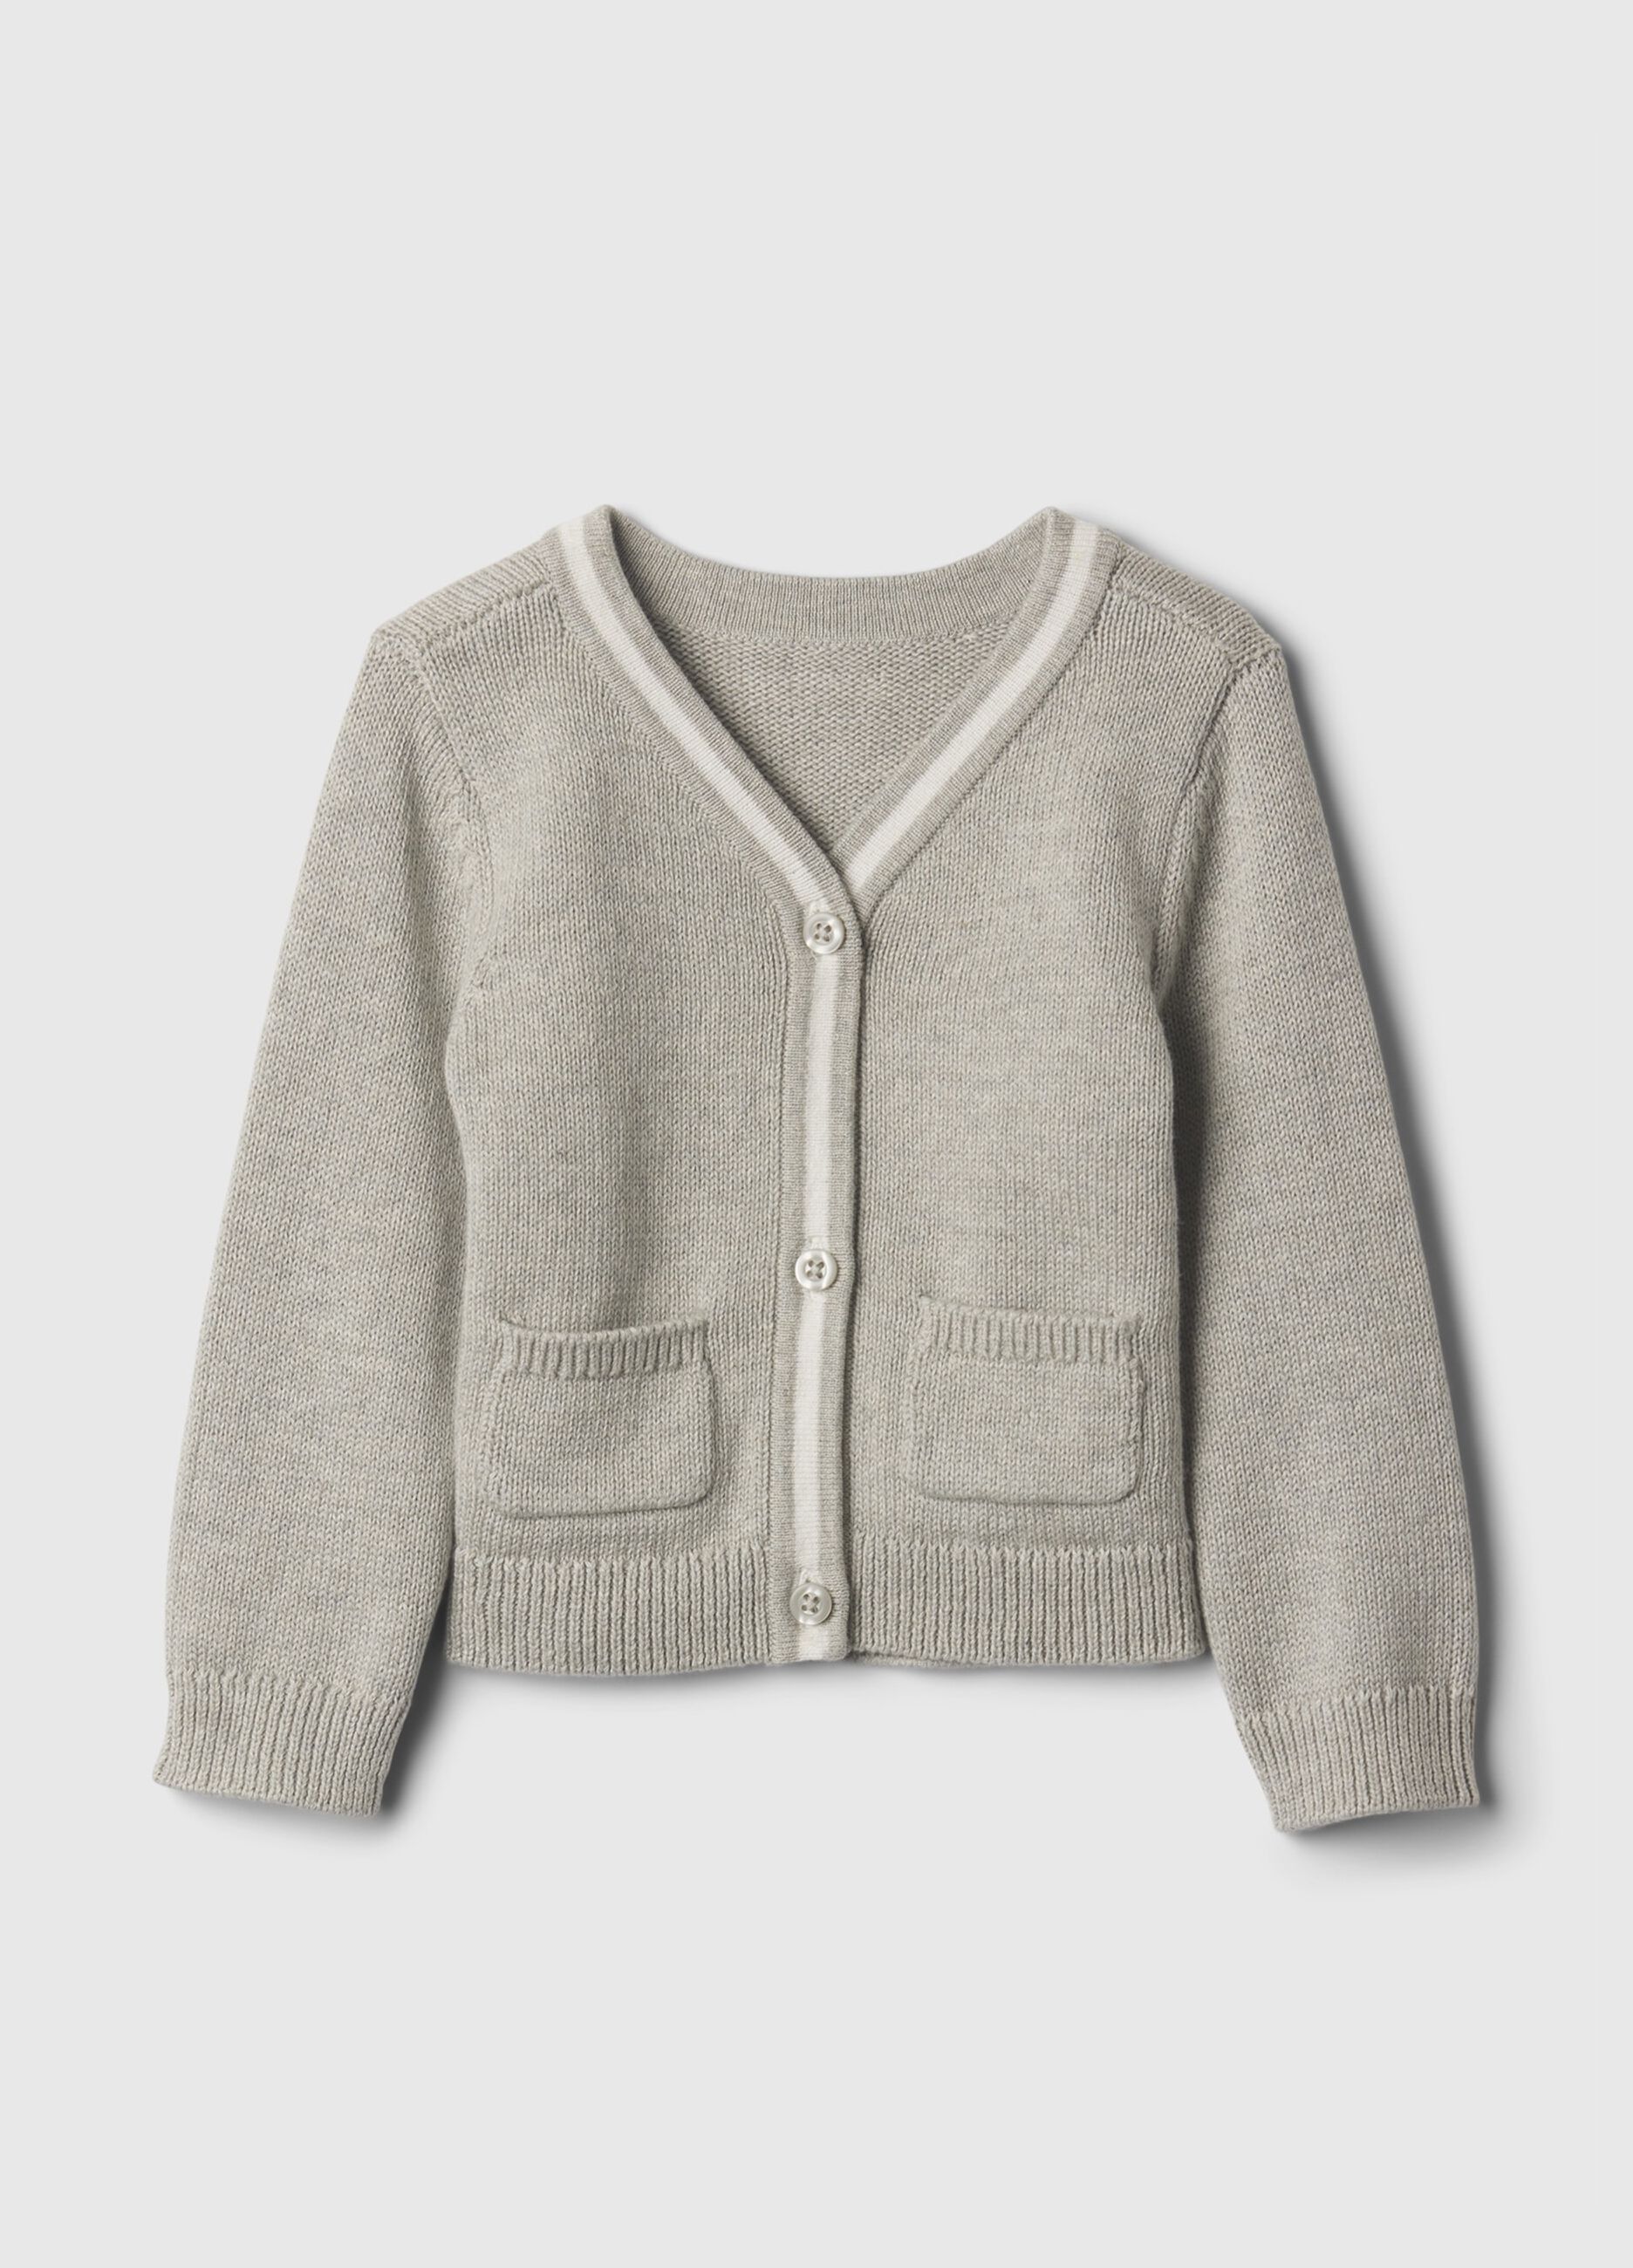 Cotton cardigan with V neck and pockets